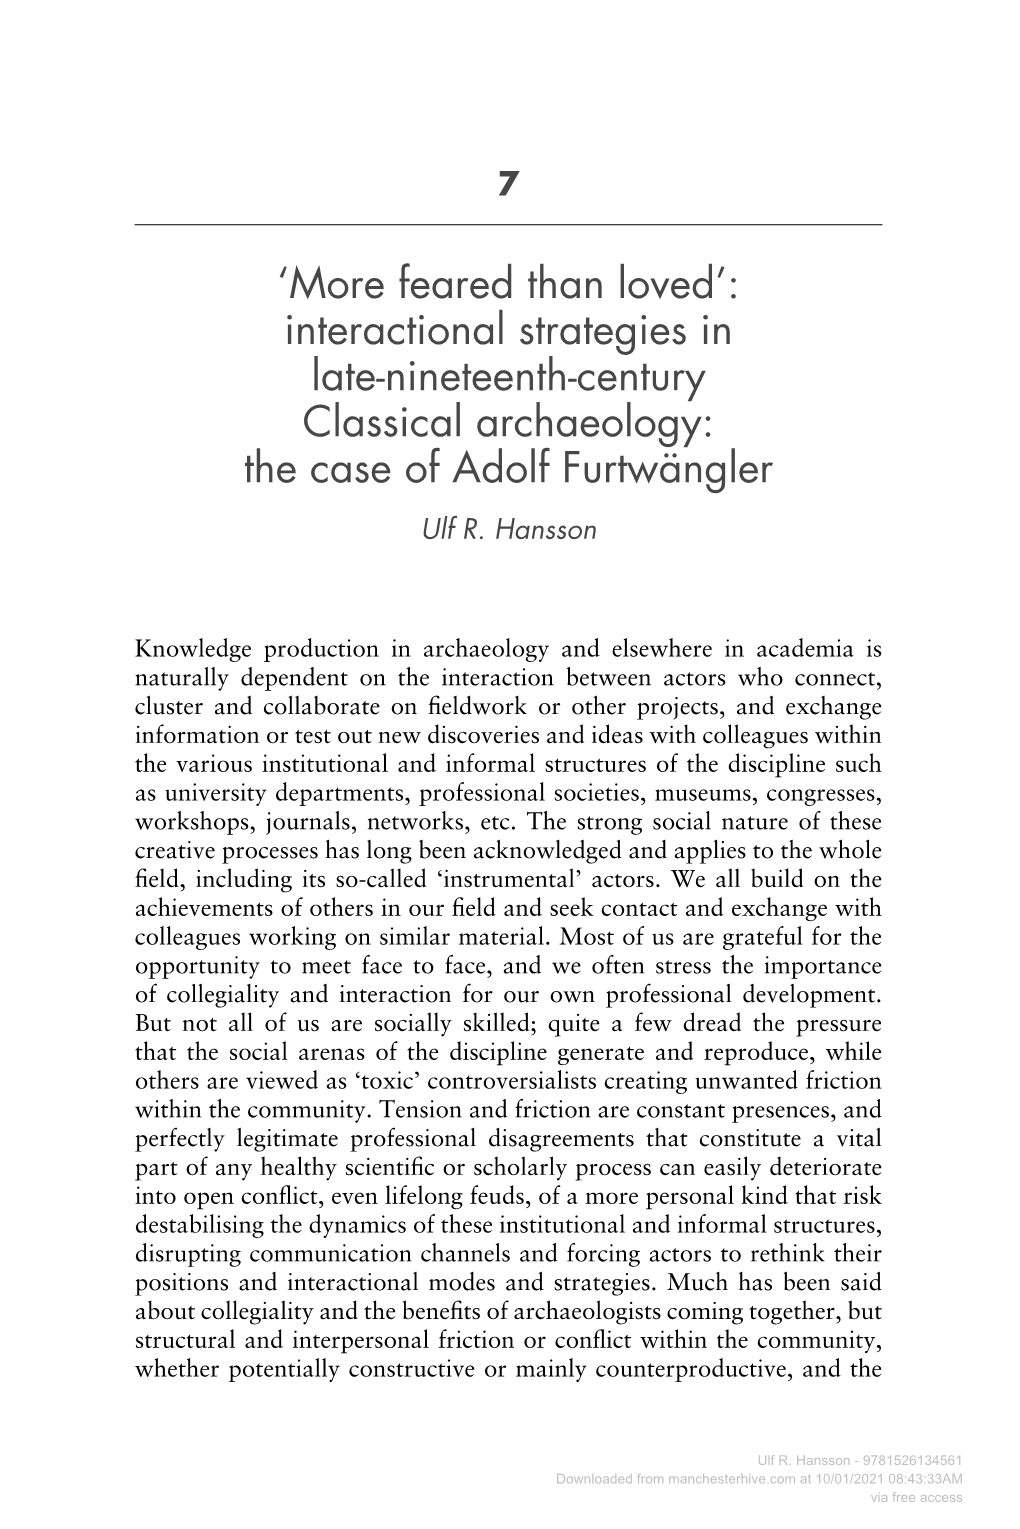 Interactional Strategies in Late-Nineteenth-Century Classical Archaeology: the Case of Adolf Furtwängler Ulf R